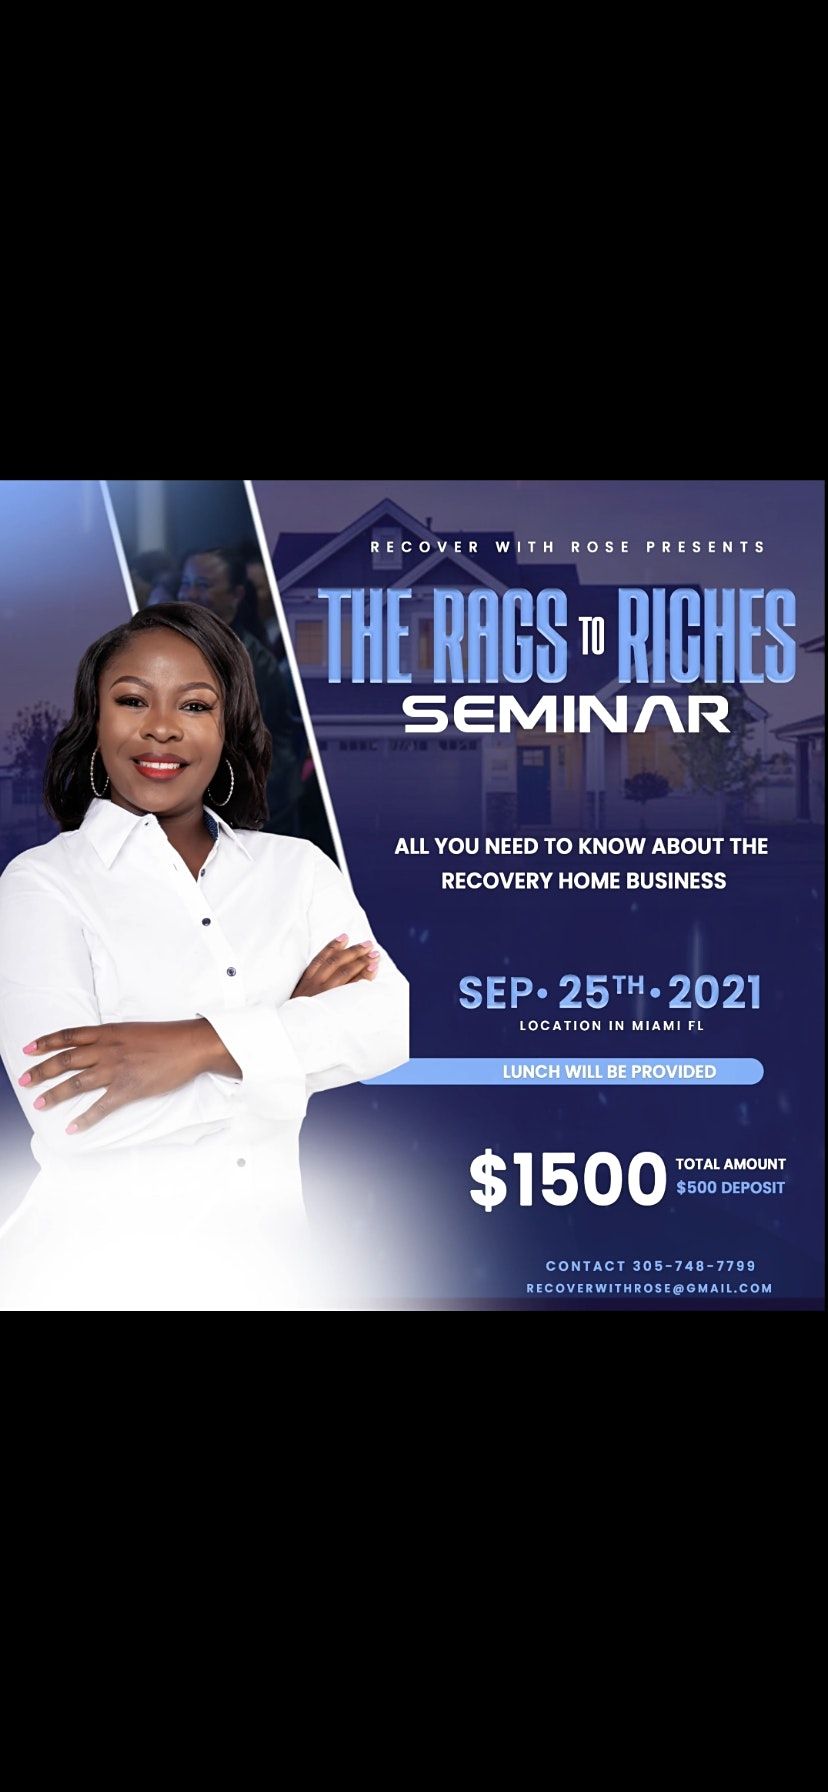 The Rags to Riches Seminar